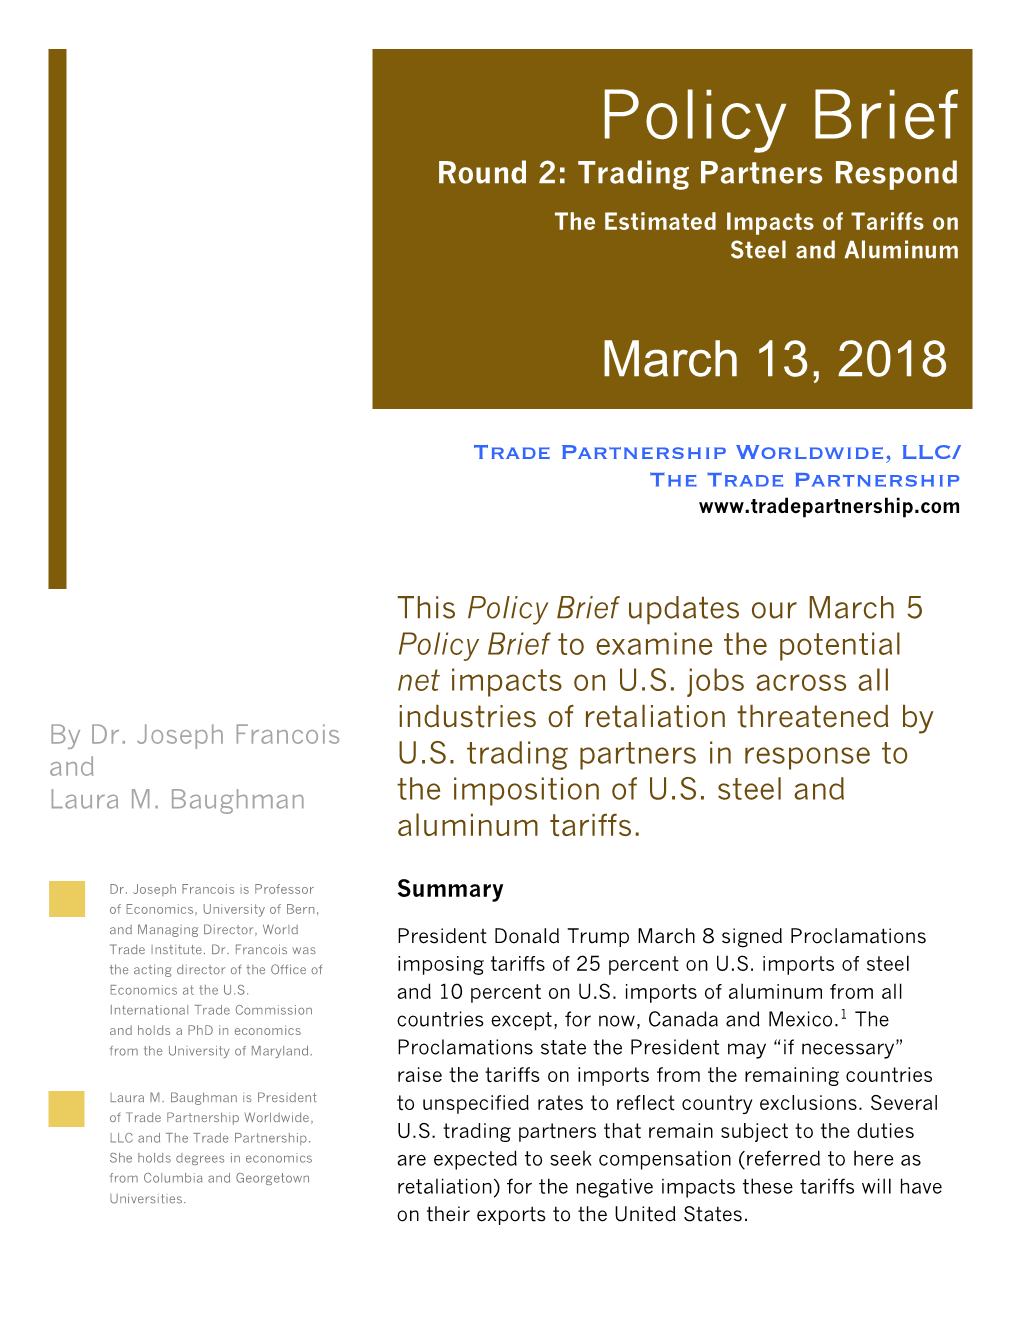 Policy Brief Round 2: Trading Partners Respond the Estimated Impacts of Tariffs on Steel and Aluminum